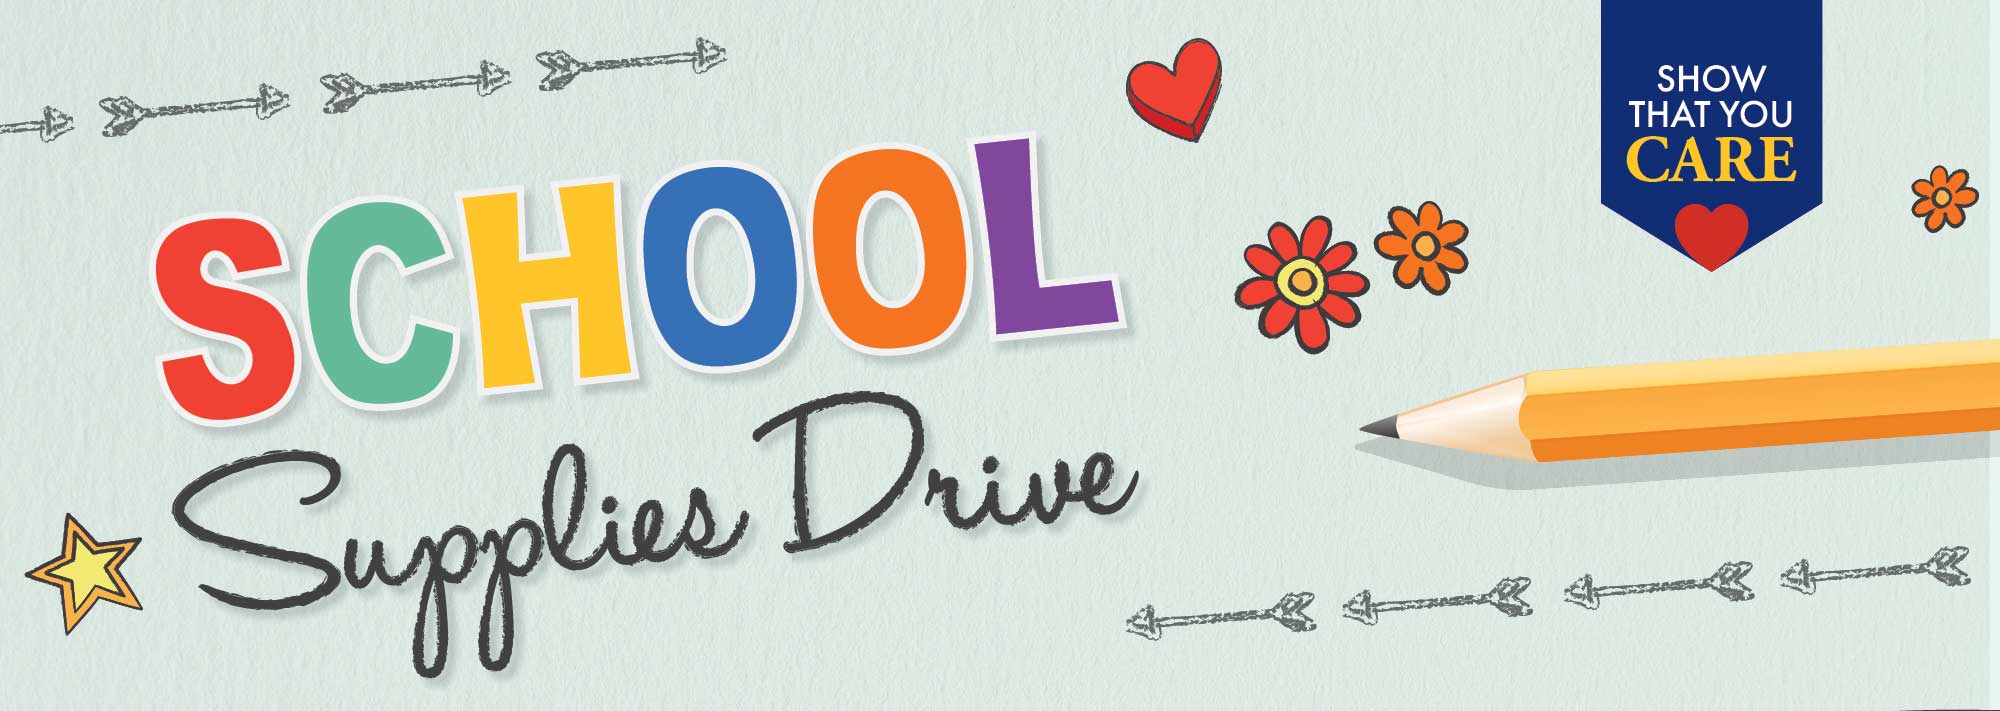 School Supplies Drive in Indianapolis